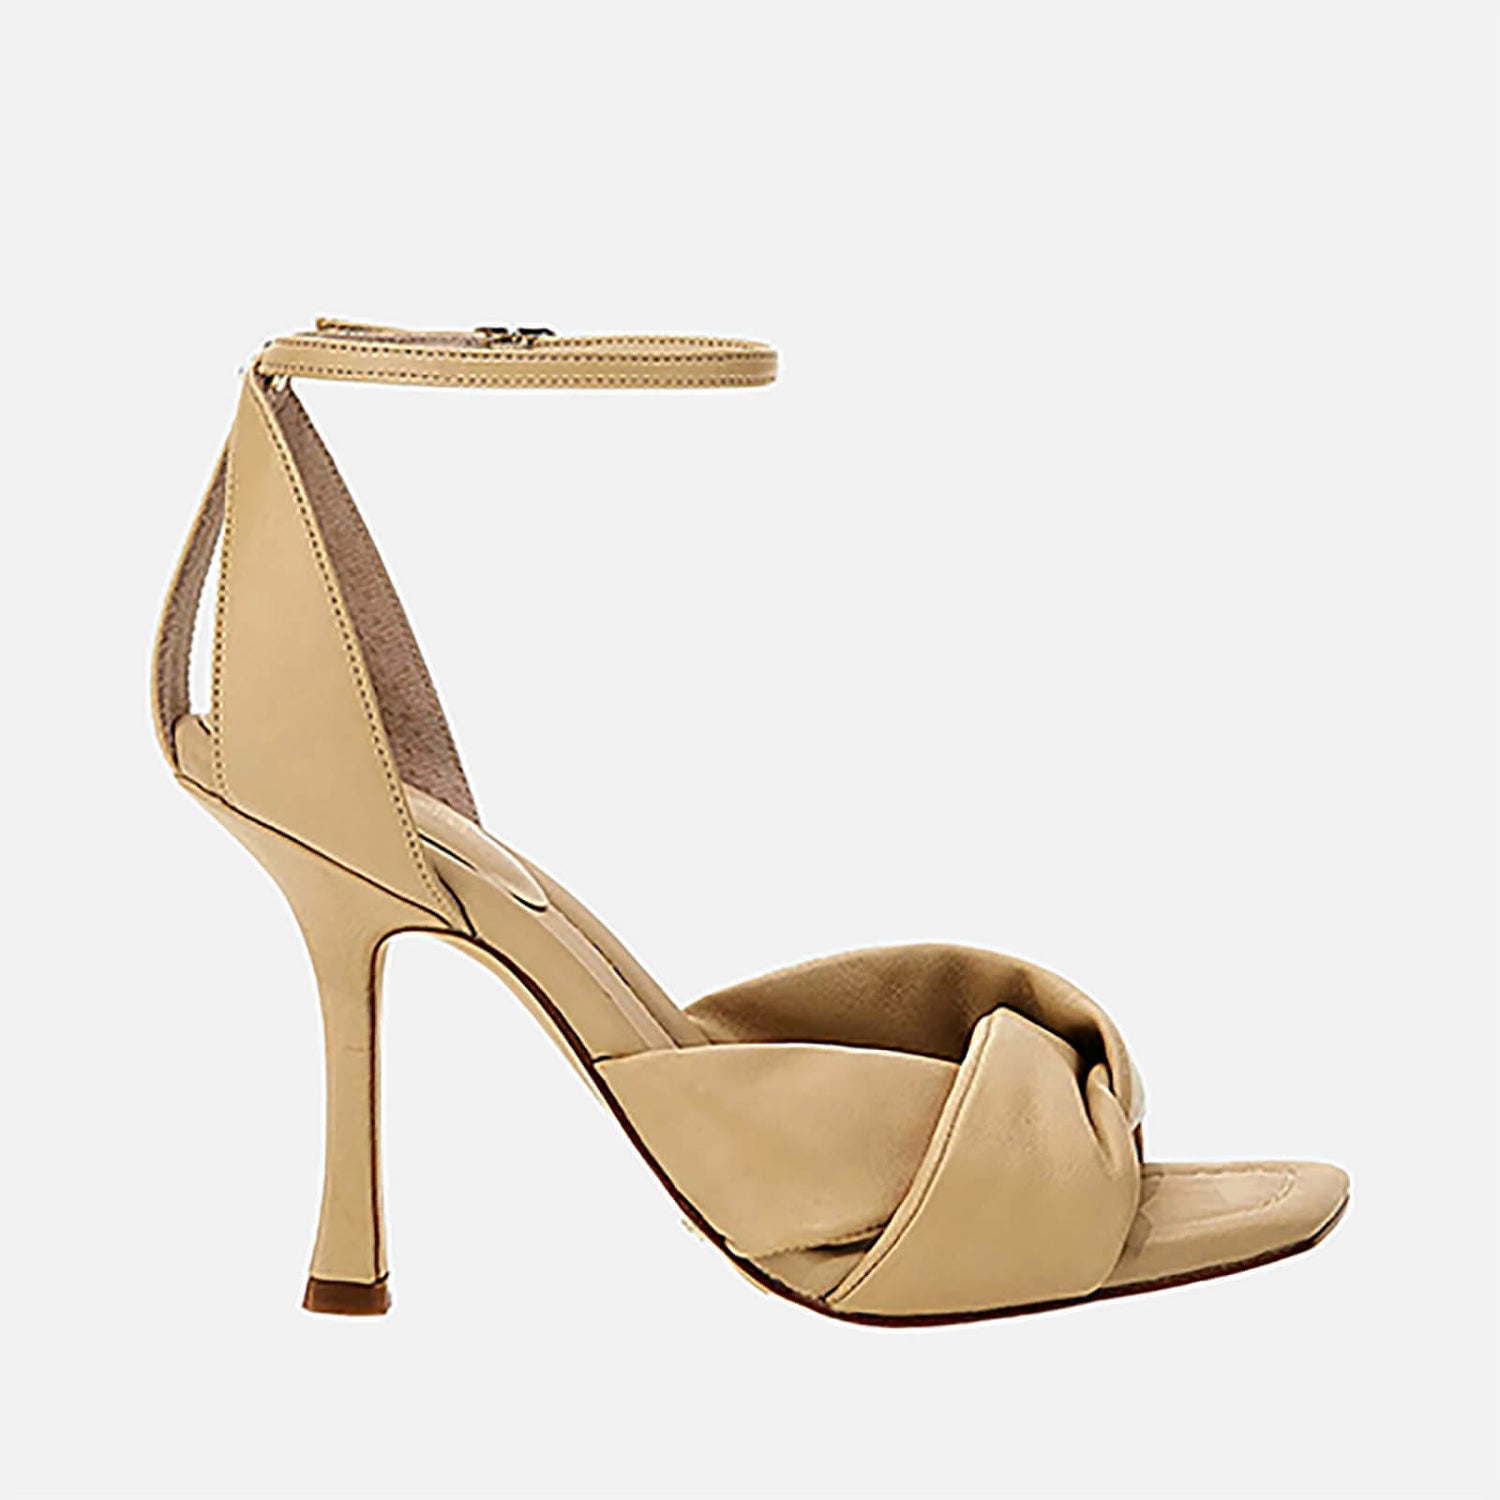 Guess Hyson Leather Heeled Sandals - UK 3